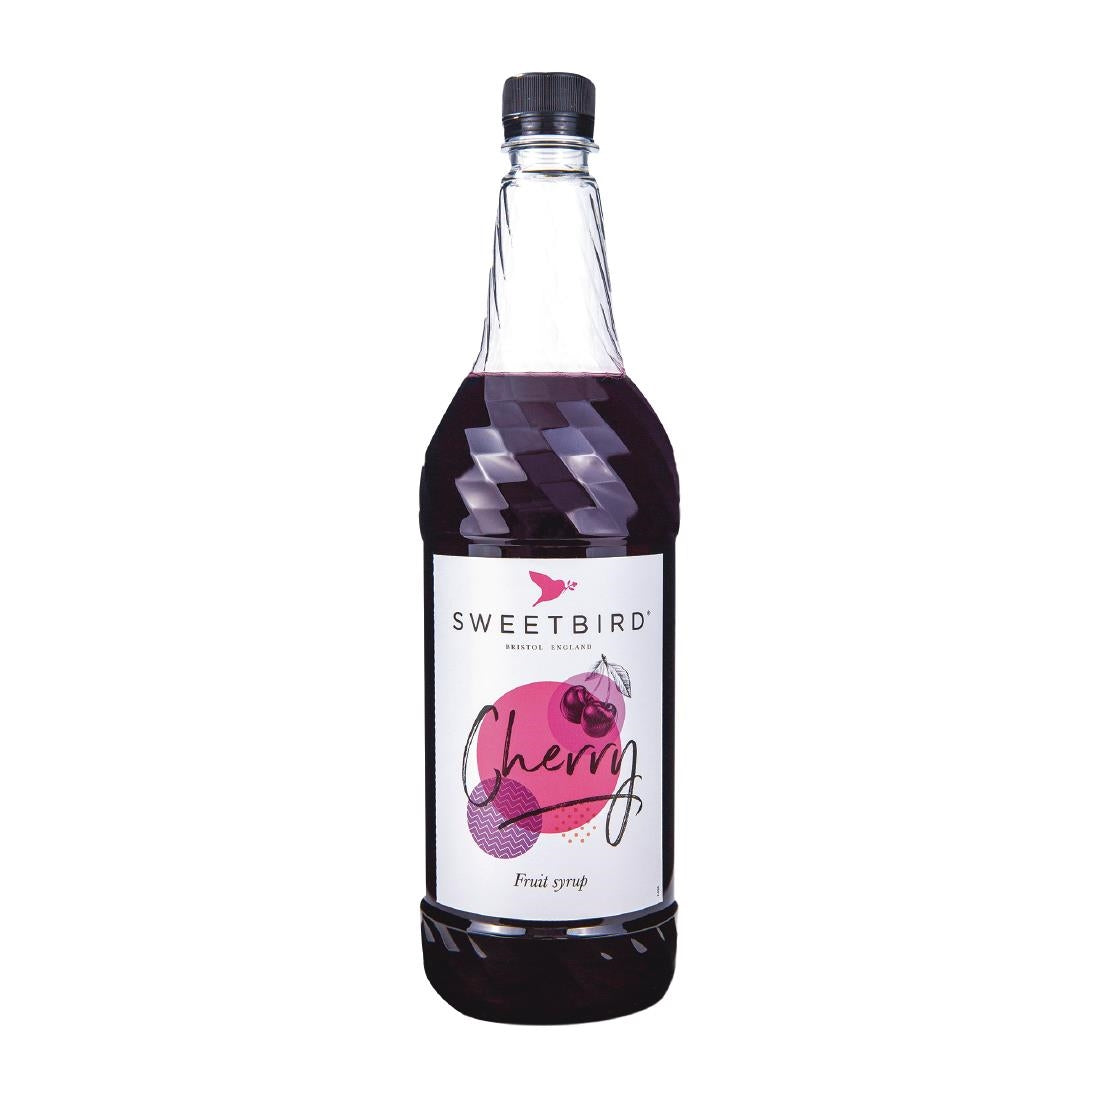 FS249 Sweetbird Cherry Syrup 1 Ltr JD Catering Equipment Solutions Ltd